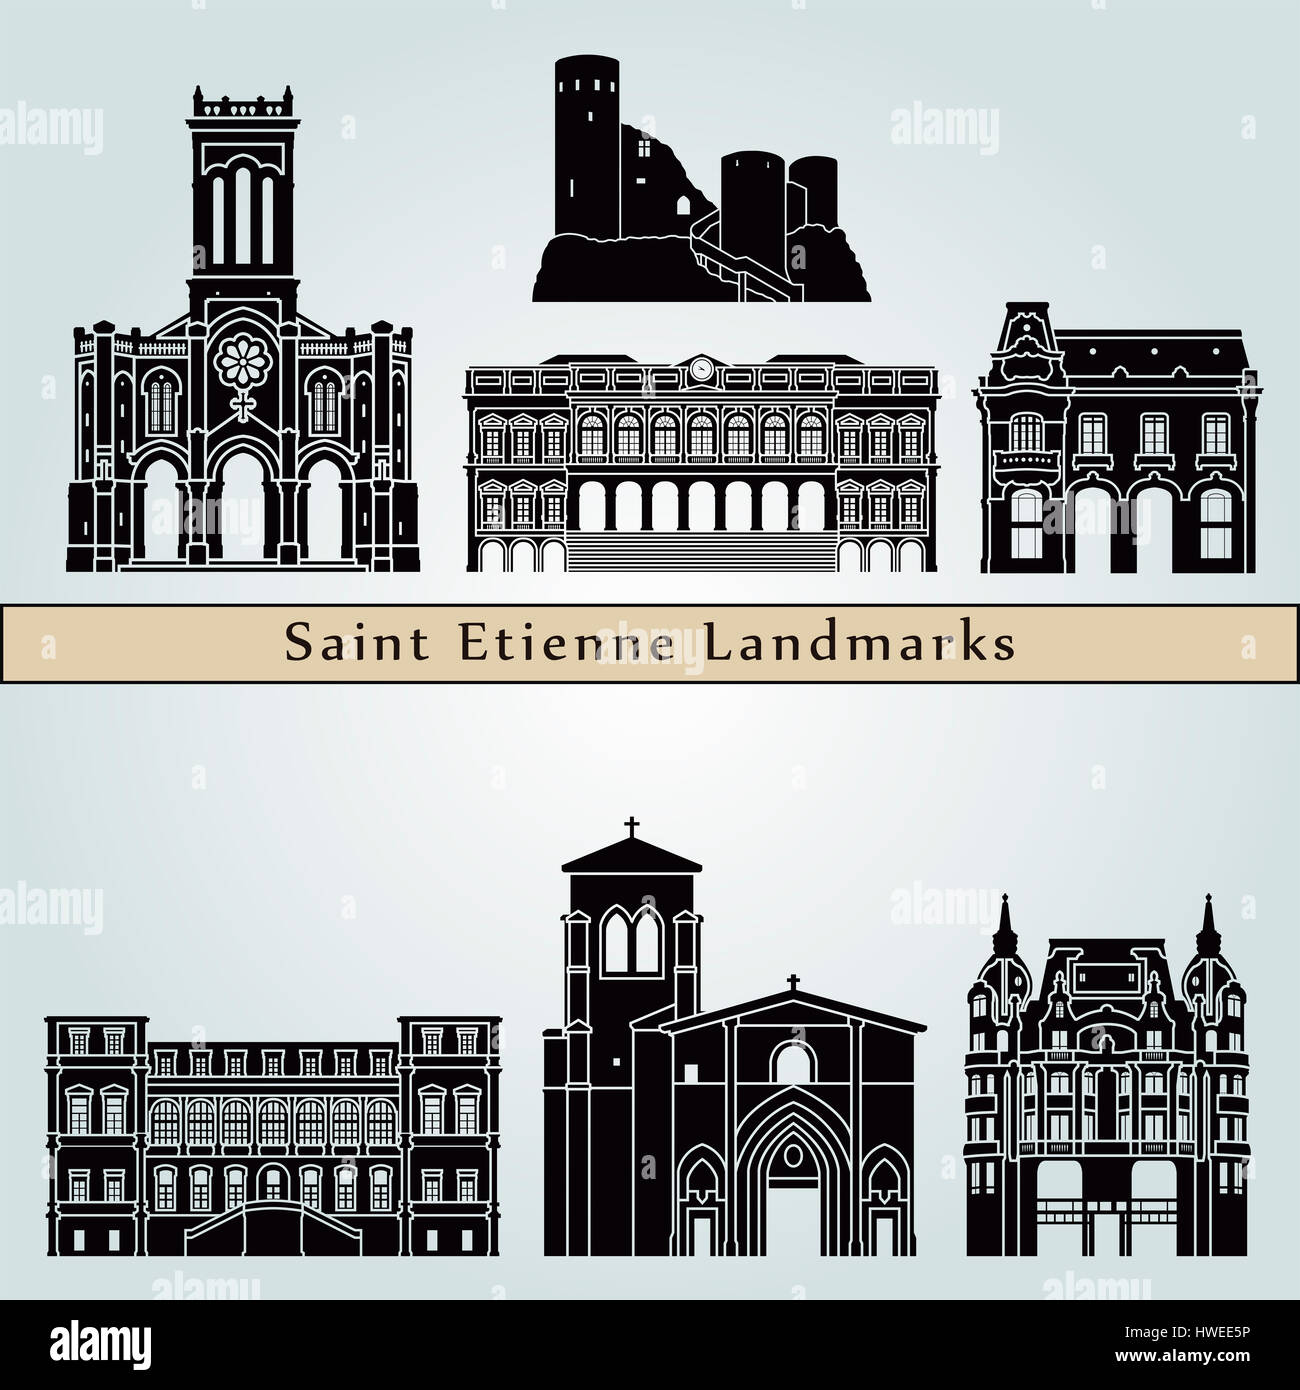 Saint Etienne monuments isolated on blue background in editable vector file Stock Photo